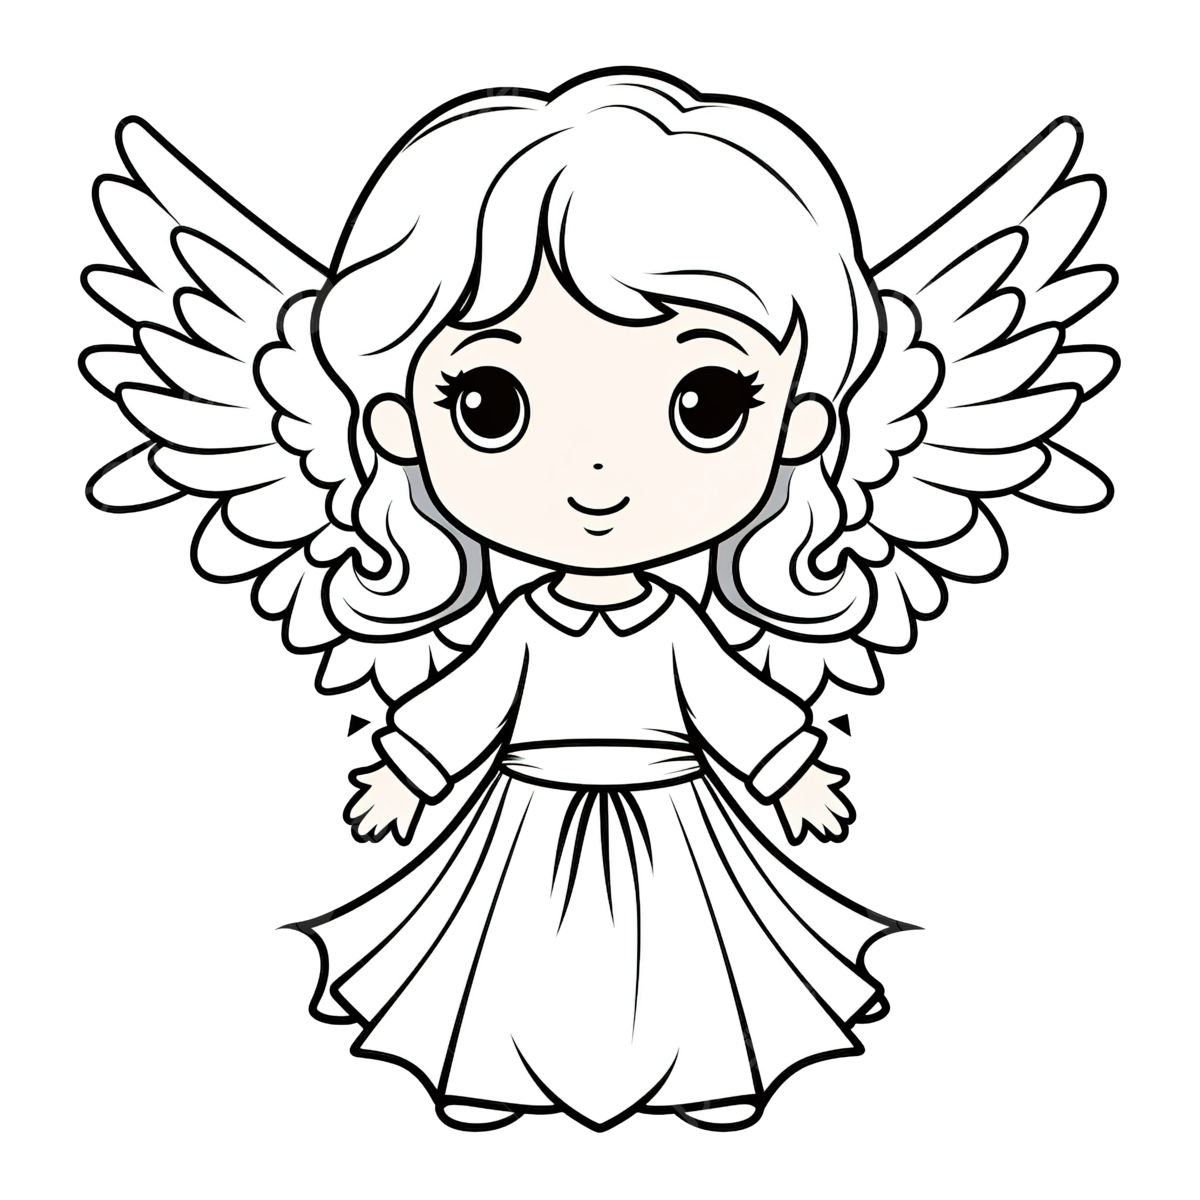 Coloring book or page for kids christmas angel black and white vector illustration christmas coloring kids coloring png transparent image and clipart for free download